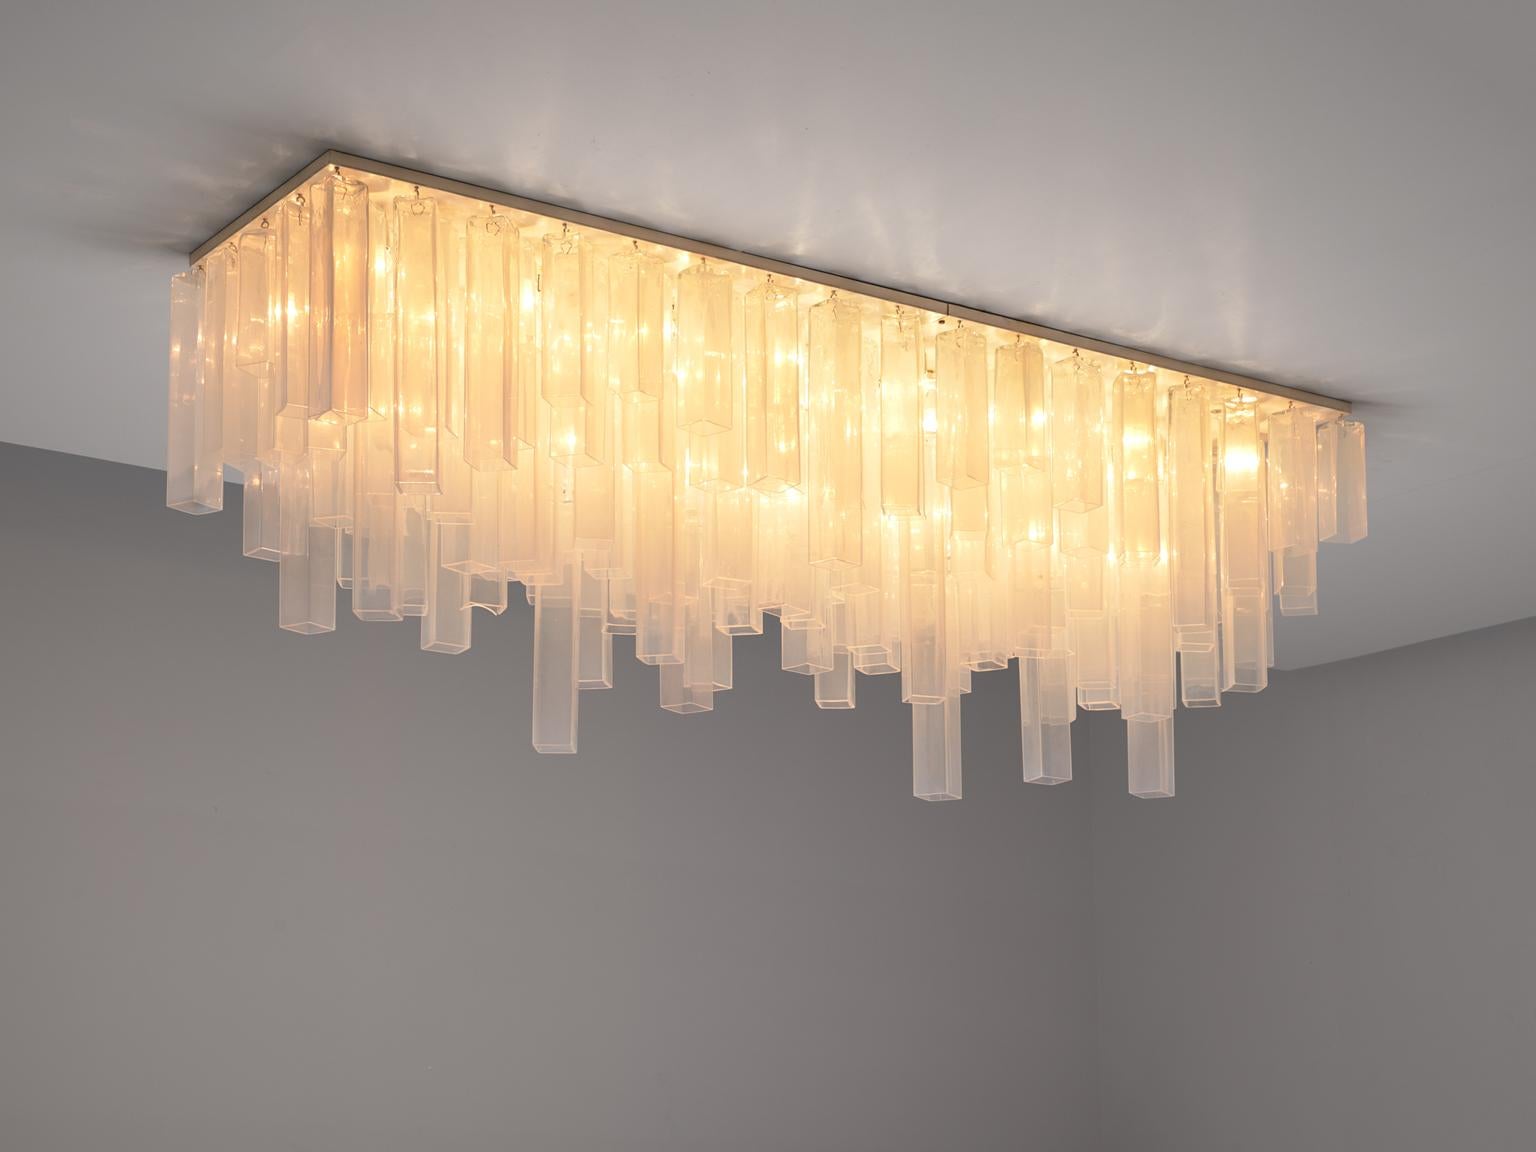 Carlo Nason for Mazzega, chandelier, glass and metal, Italy, 1970s

Stunning rectangular shaped chandelier of an incredible length of 220 cm / 8 ft. The chandelier consists of a metal base that holds a large amount of square tubes in glass, all of